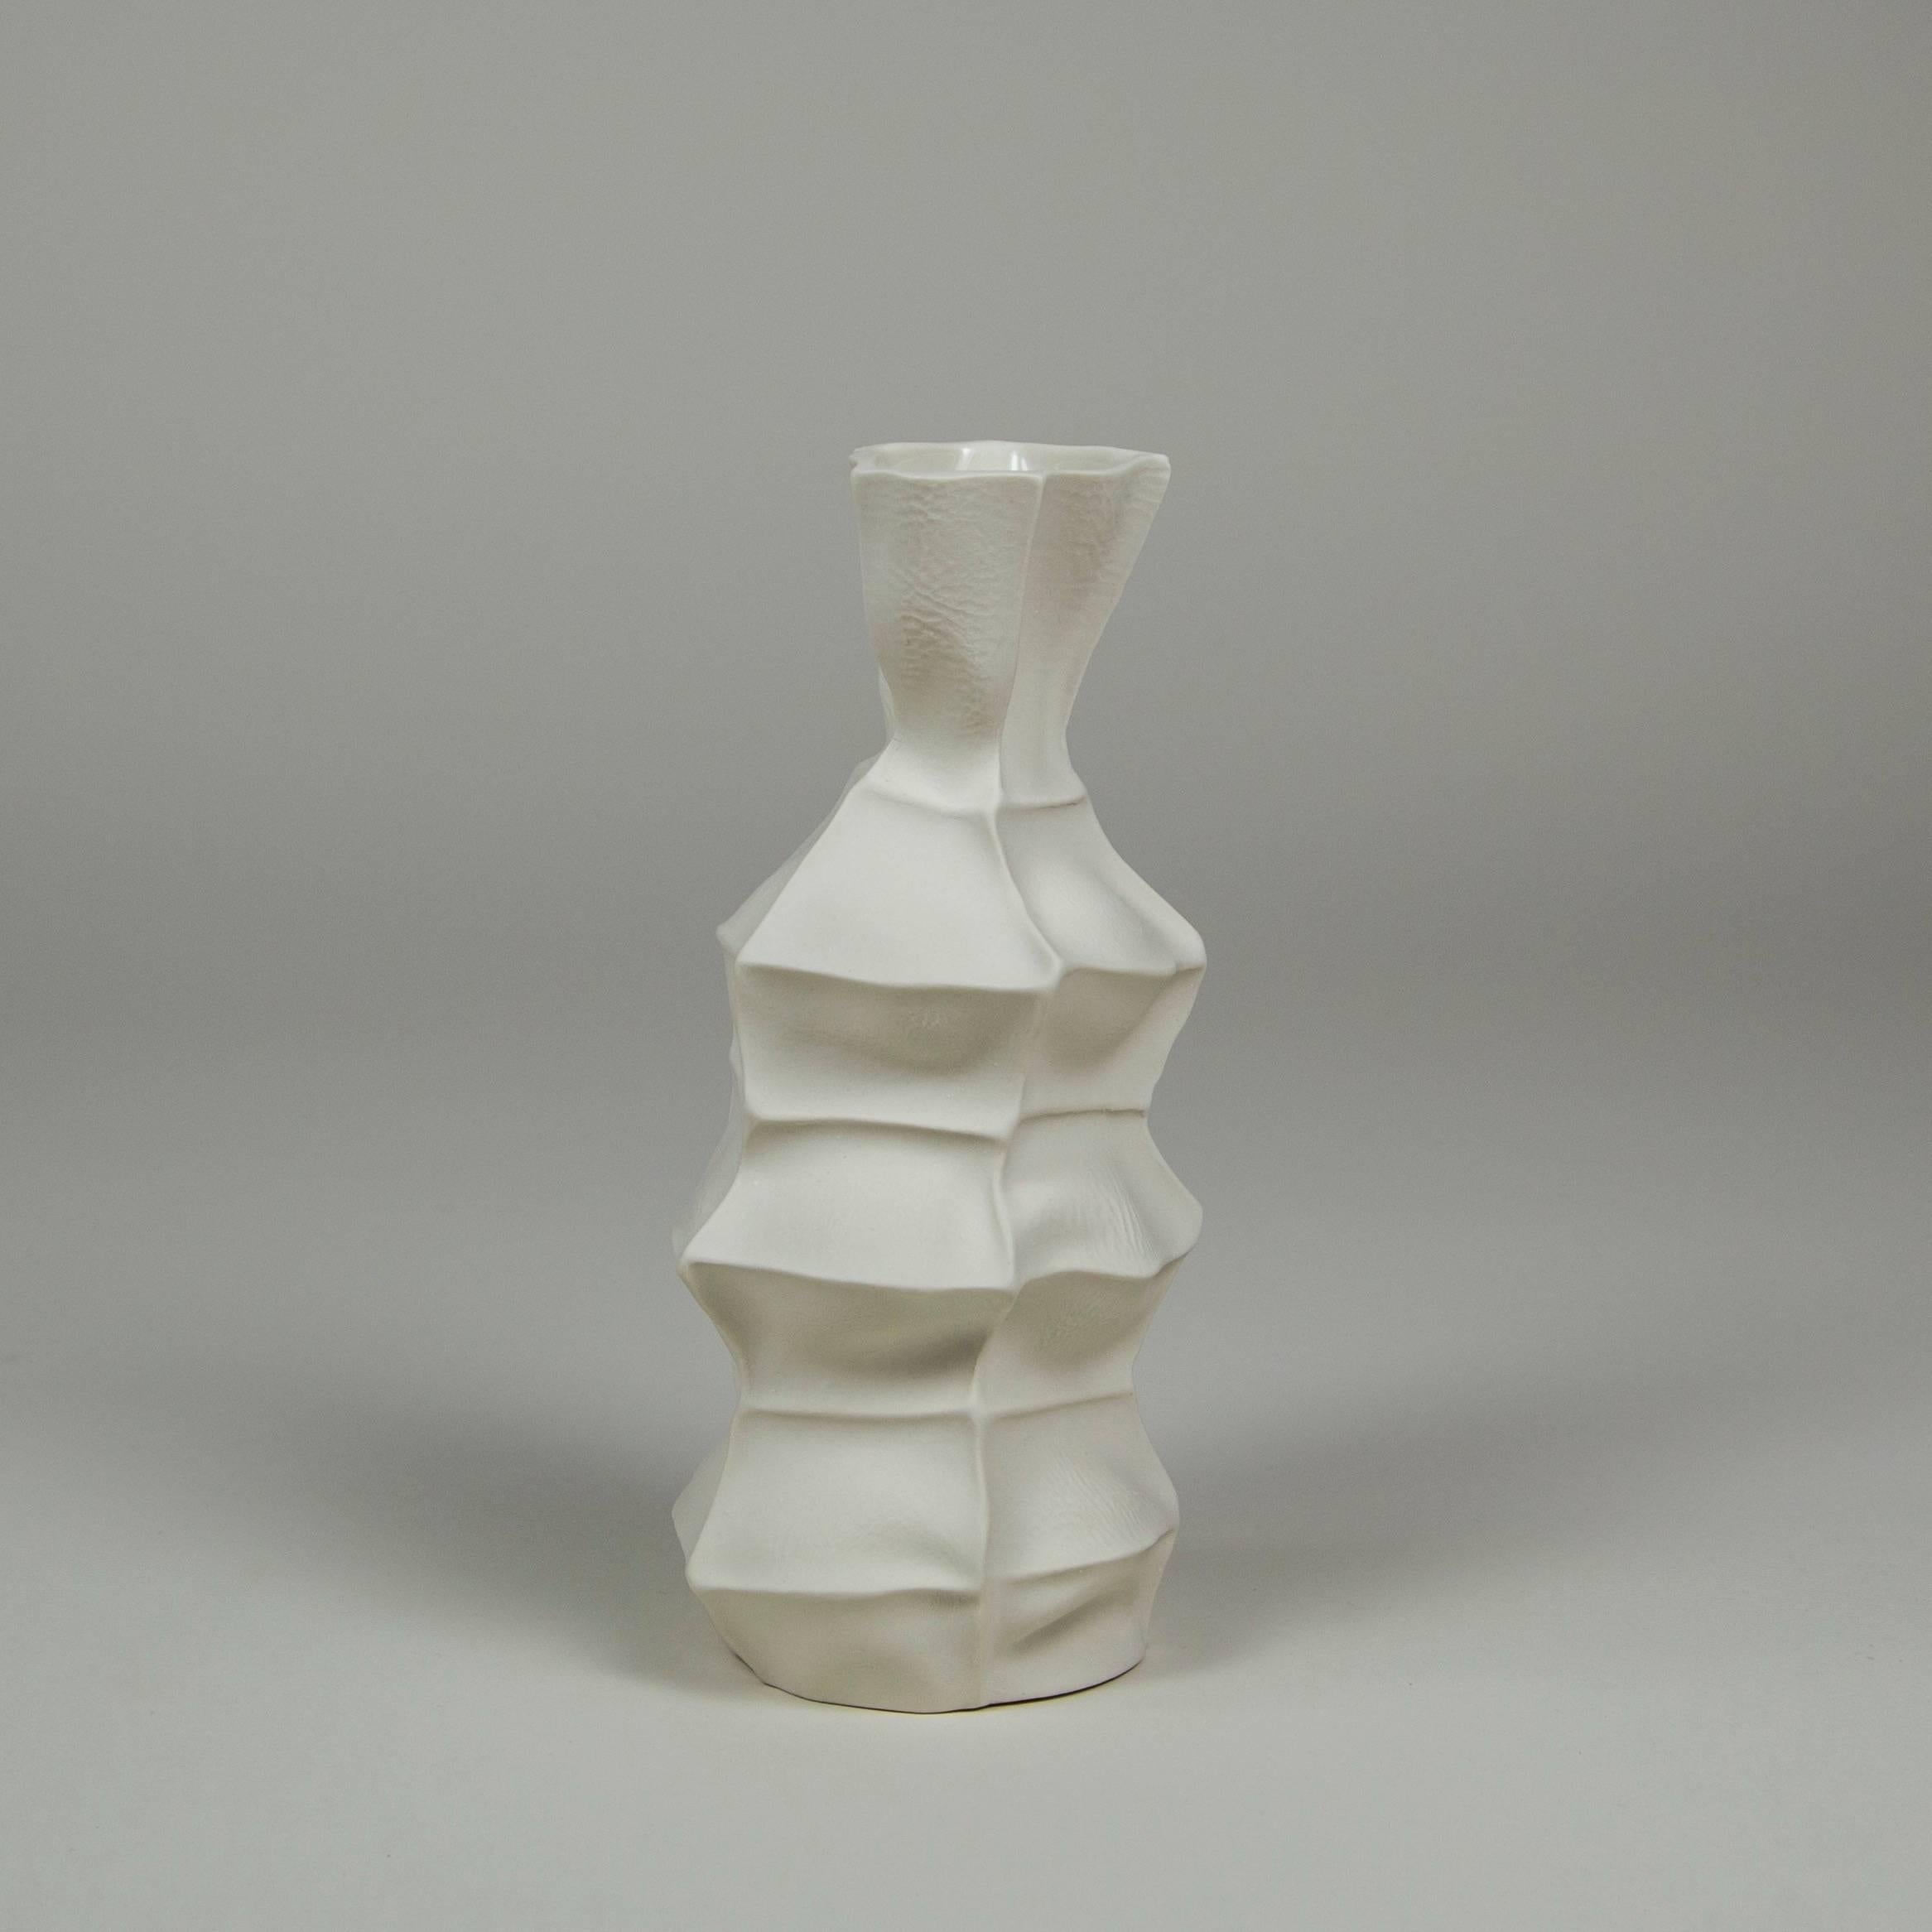 Cast Set of Five Kawa Vases by Luft Tanaka, in Stock